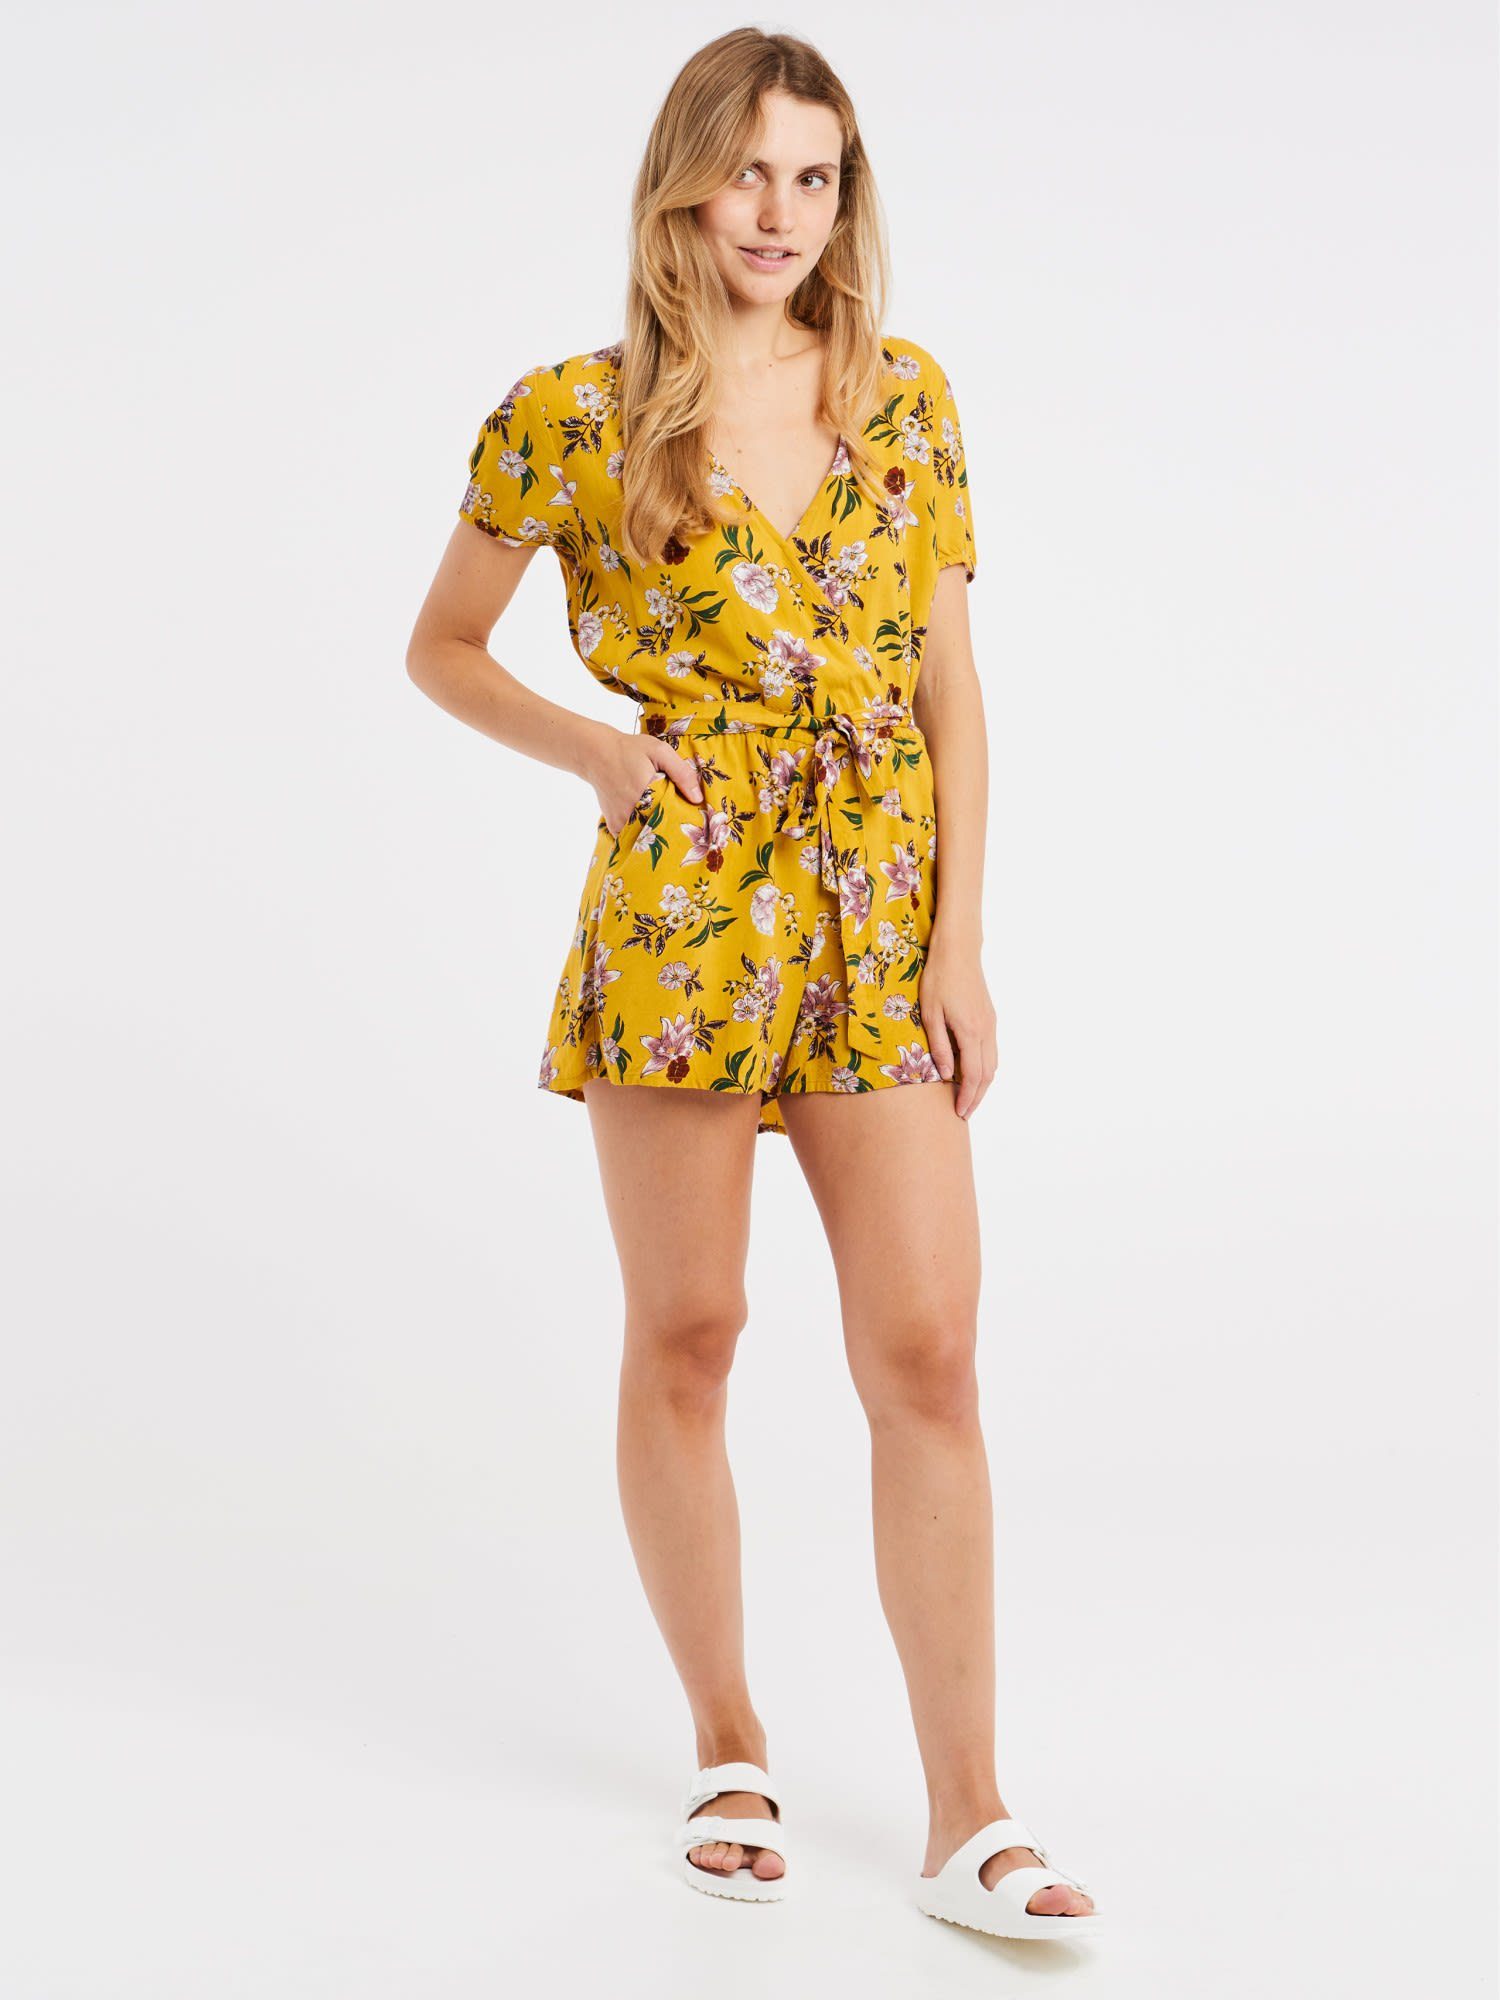 Protest Overall Protest W Prtleilani Damen Bekleidung Playsuit